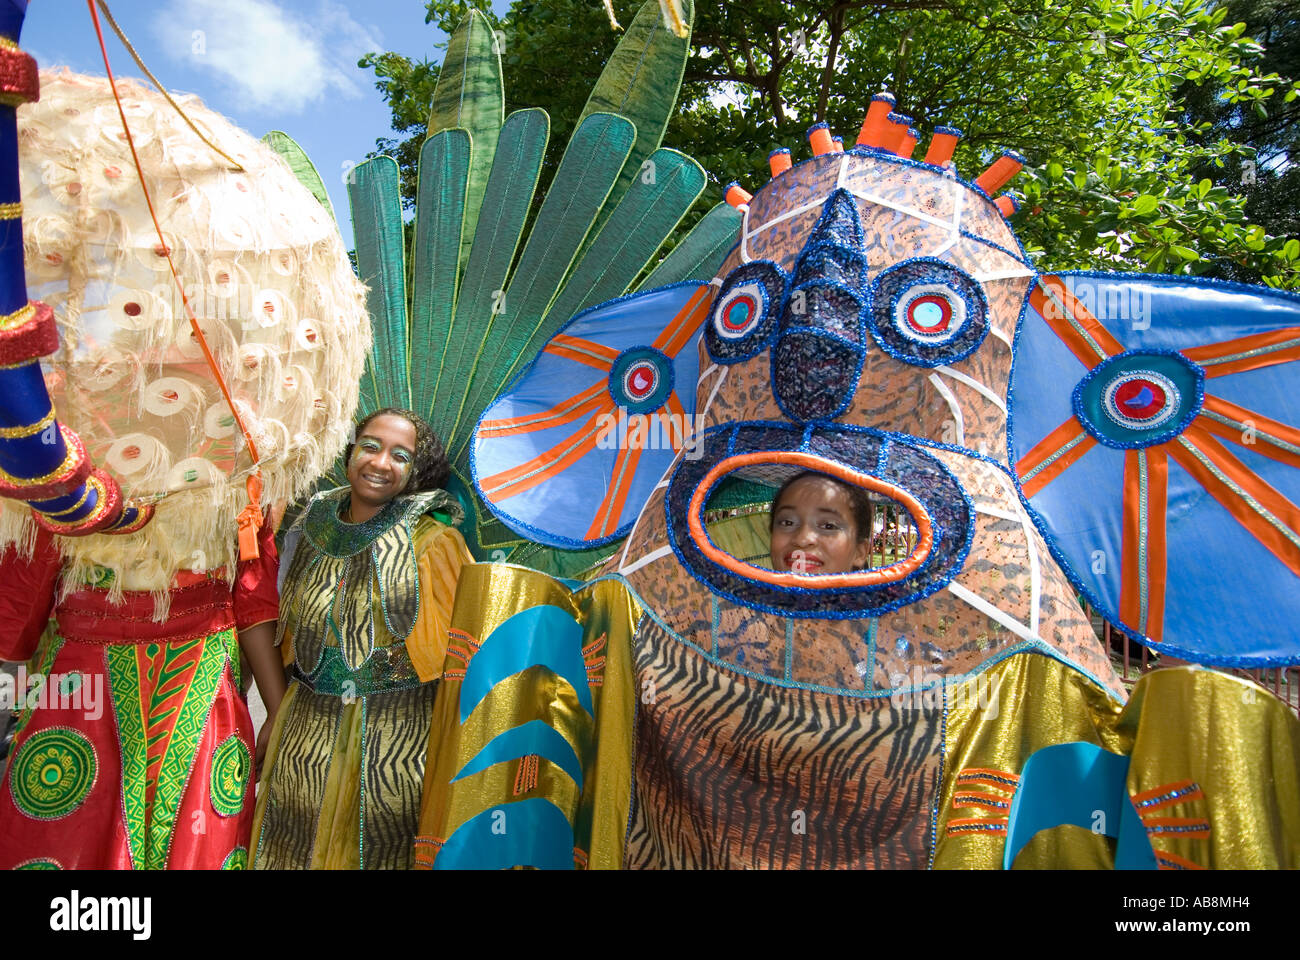 West Indies Port of Spain Trinidad Carnival Children in colorful costumes parading in the Kids Parade Stock Photo